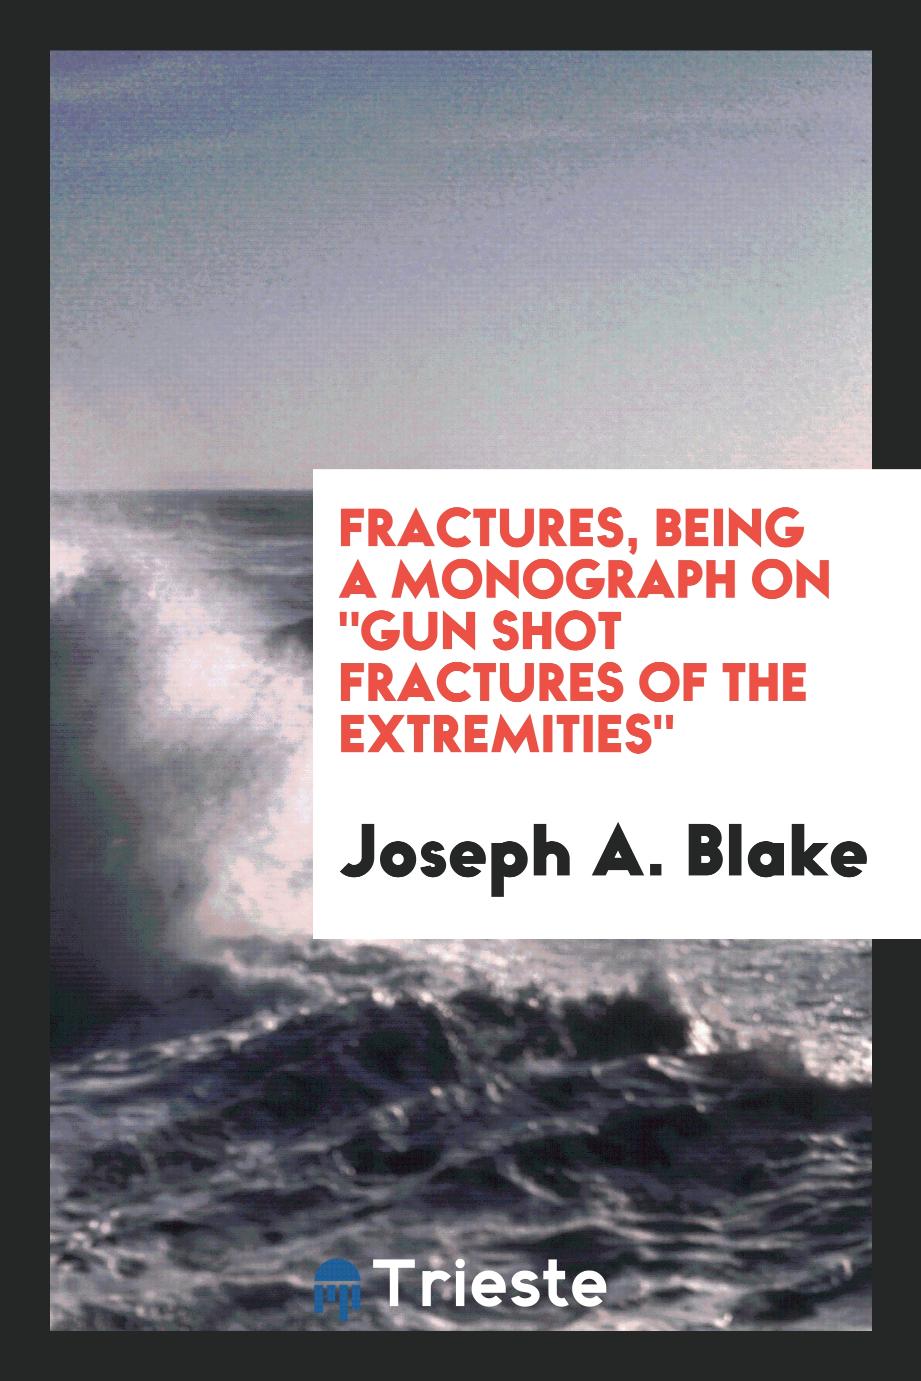 Fractures, Being a Monograph On "Gun Shot Fractures of the Extremities"